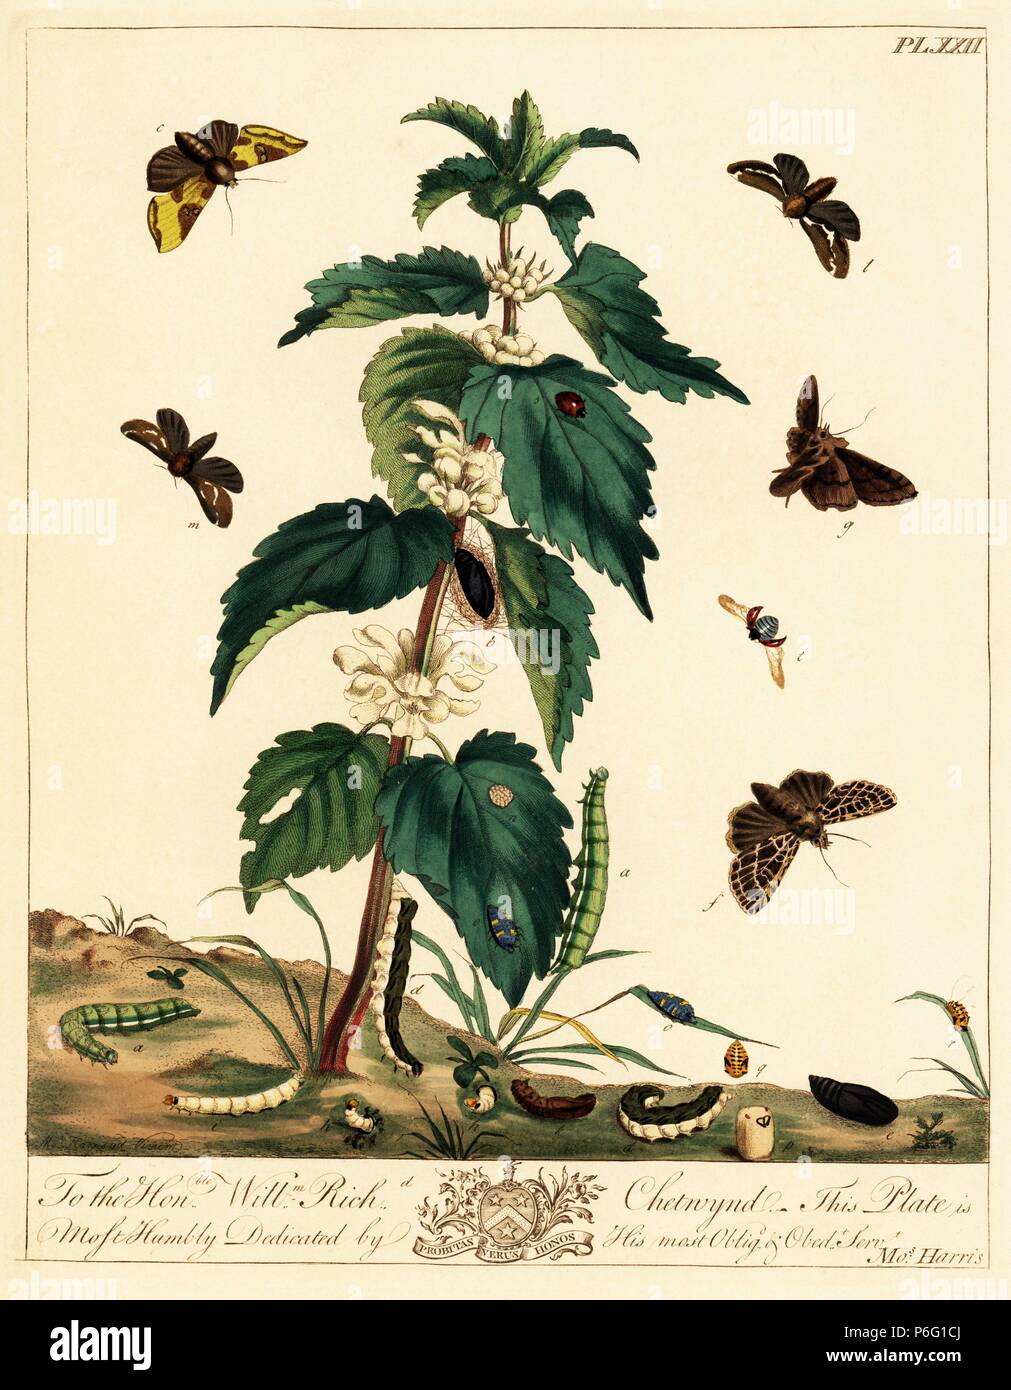 Burnished brass moth, Diachrysia chrysitis, dark gothic, Naenia typica, orange swift, Triodia sylvina, and seven spotted ladybird, Coccinella septempunctata, on a stinging nettle plant, Urtica dioica. Handcoloured lithograph after an illustration by Moses Harris from 'The Aurelian; a Natural History of English Moths and Butterflies,' new edition edited by J. O. Westwood, published by Henry Bohn, London, 1840. Stock Photo